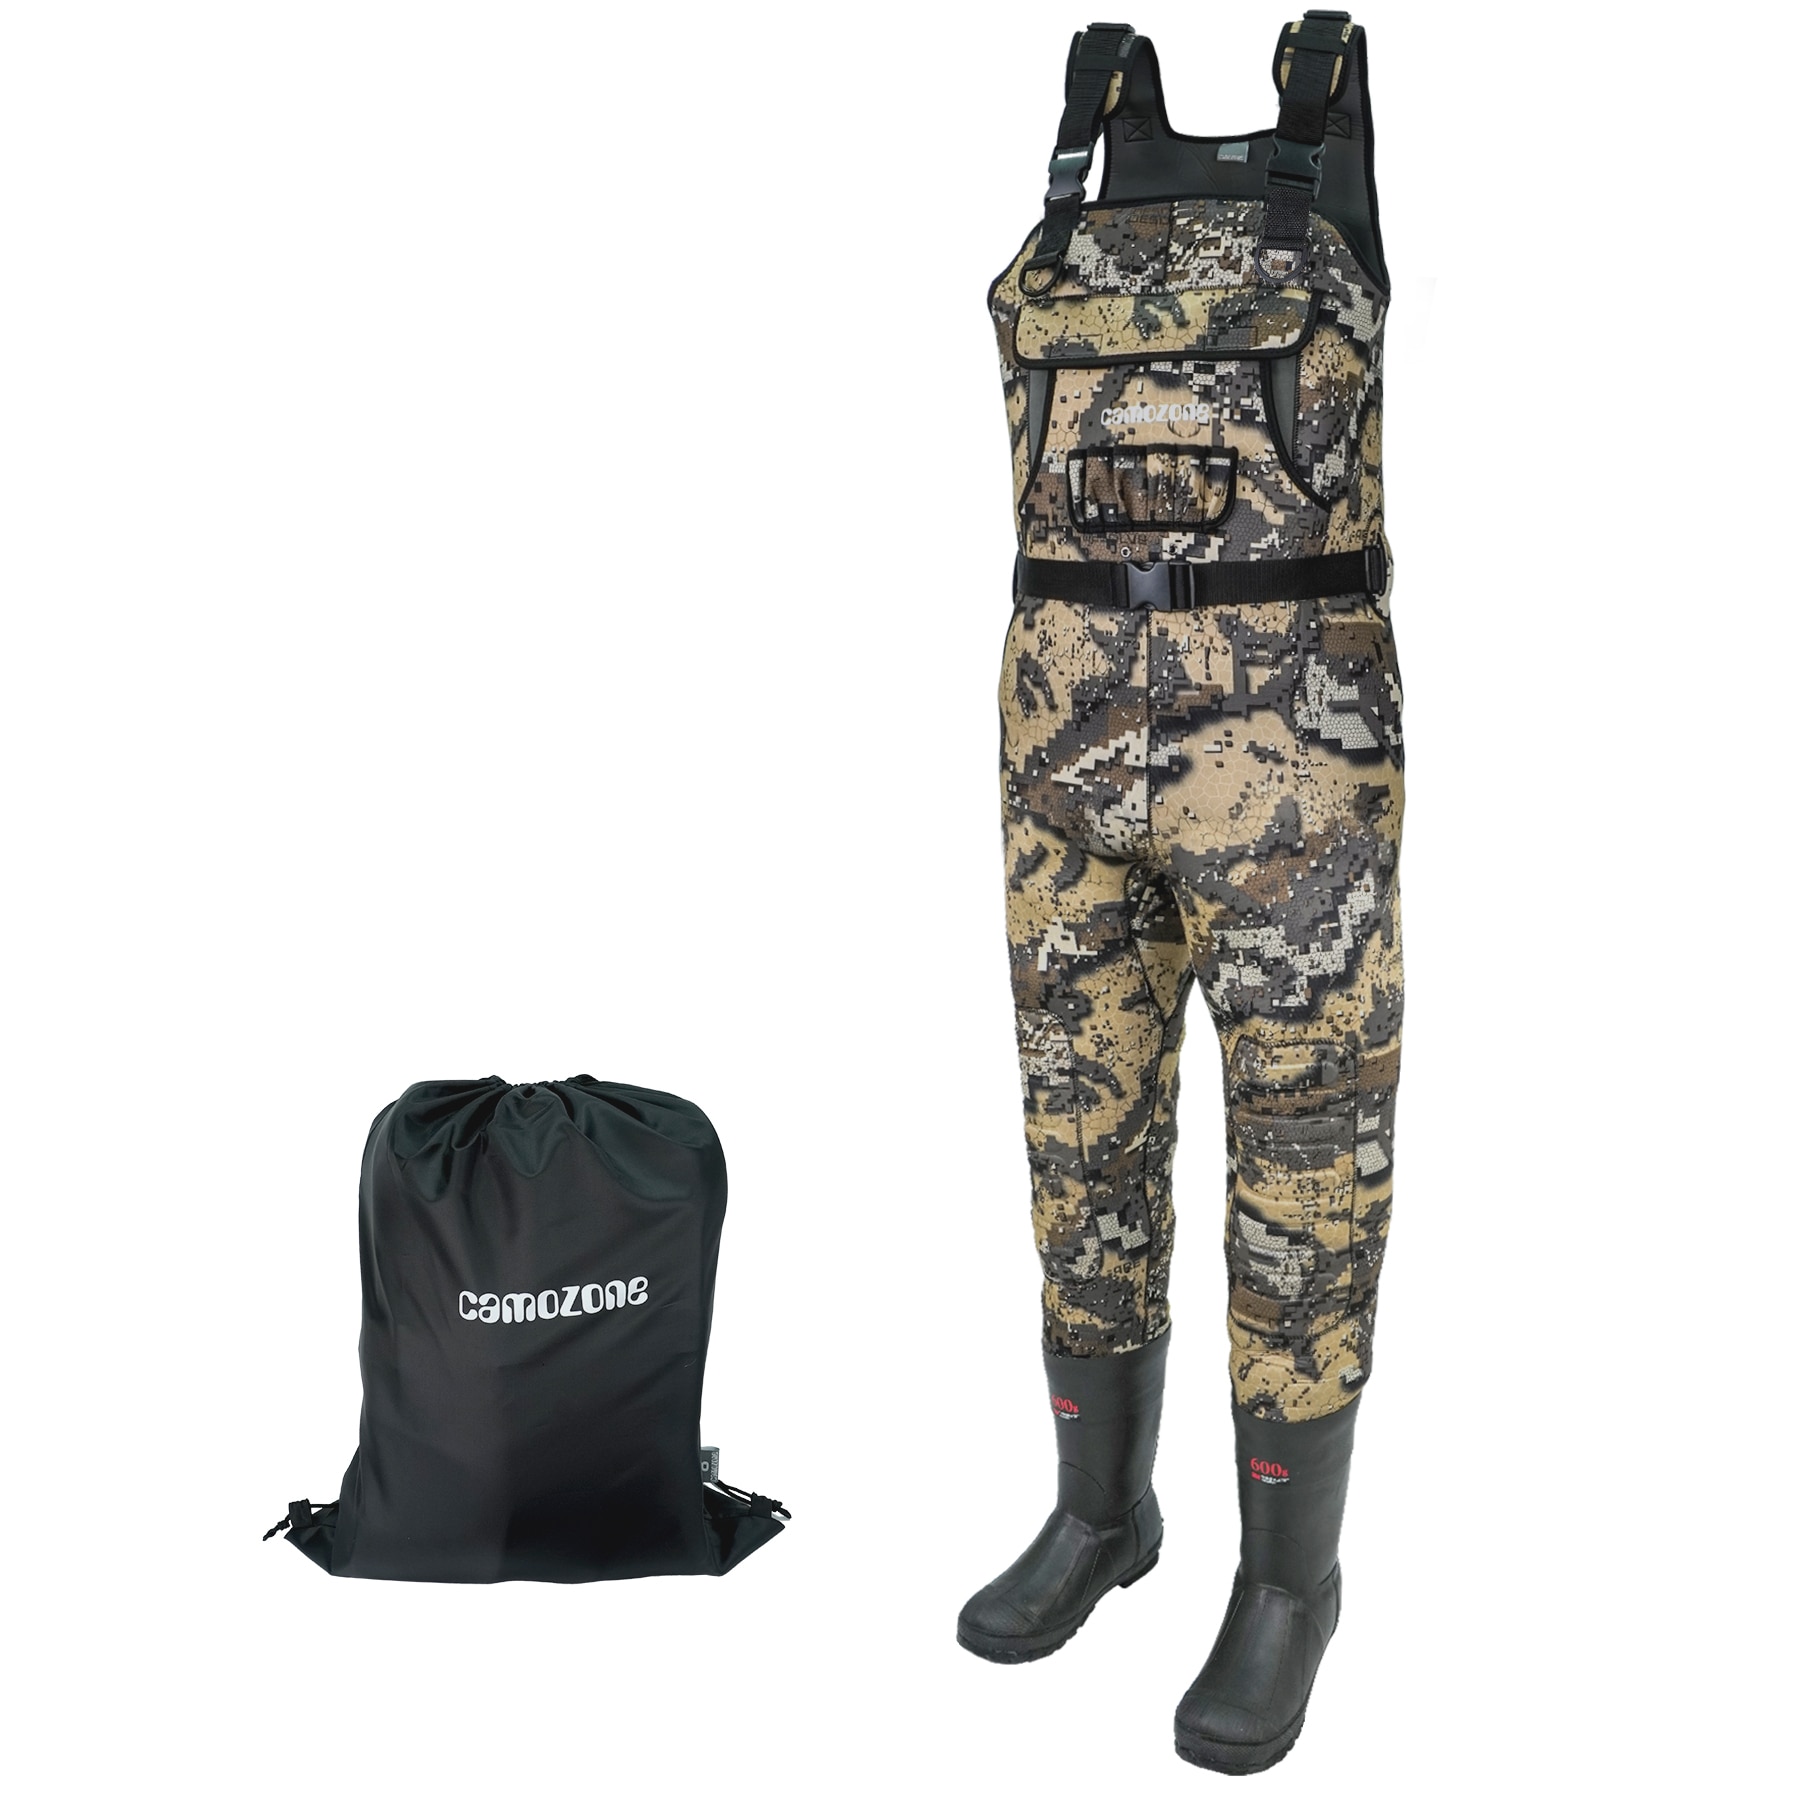 Camozone Neoprene Chest Waders with Boots Veil Camo 7 NBCW005B-7